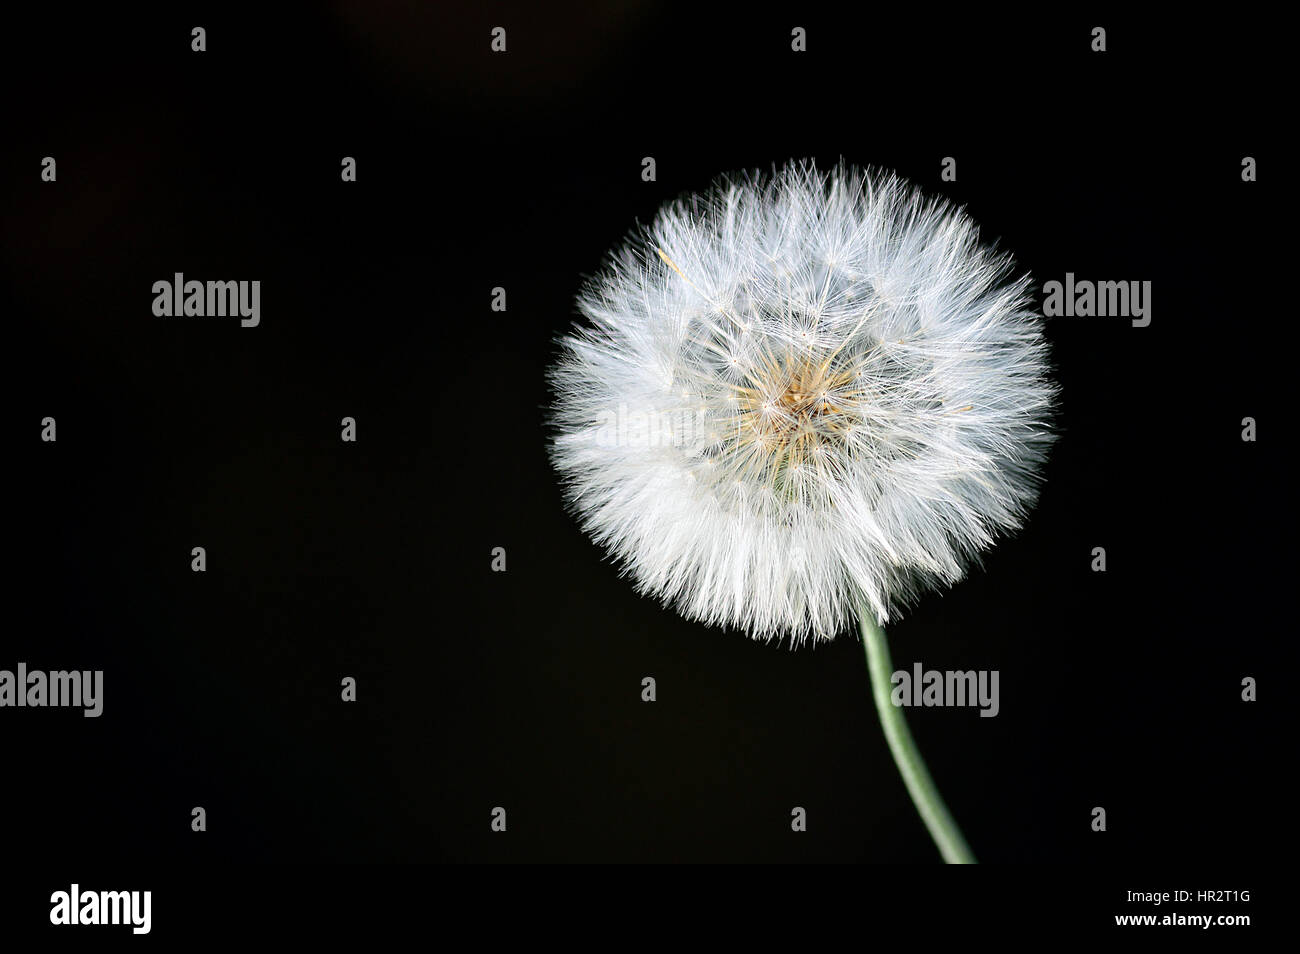 Dandelion flower closeup isolated over a black background Stock Photo